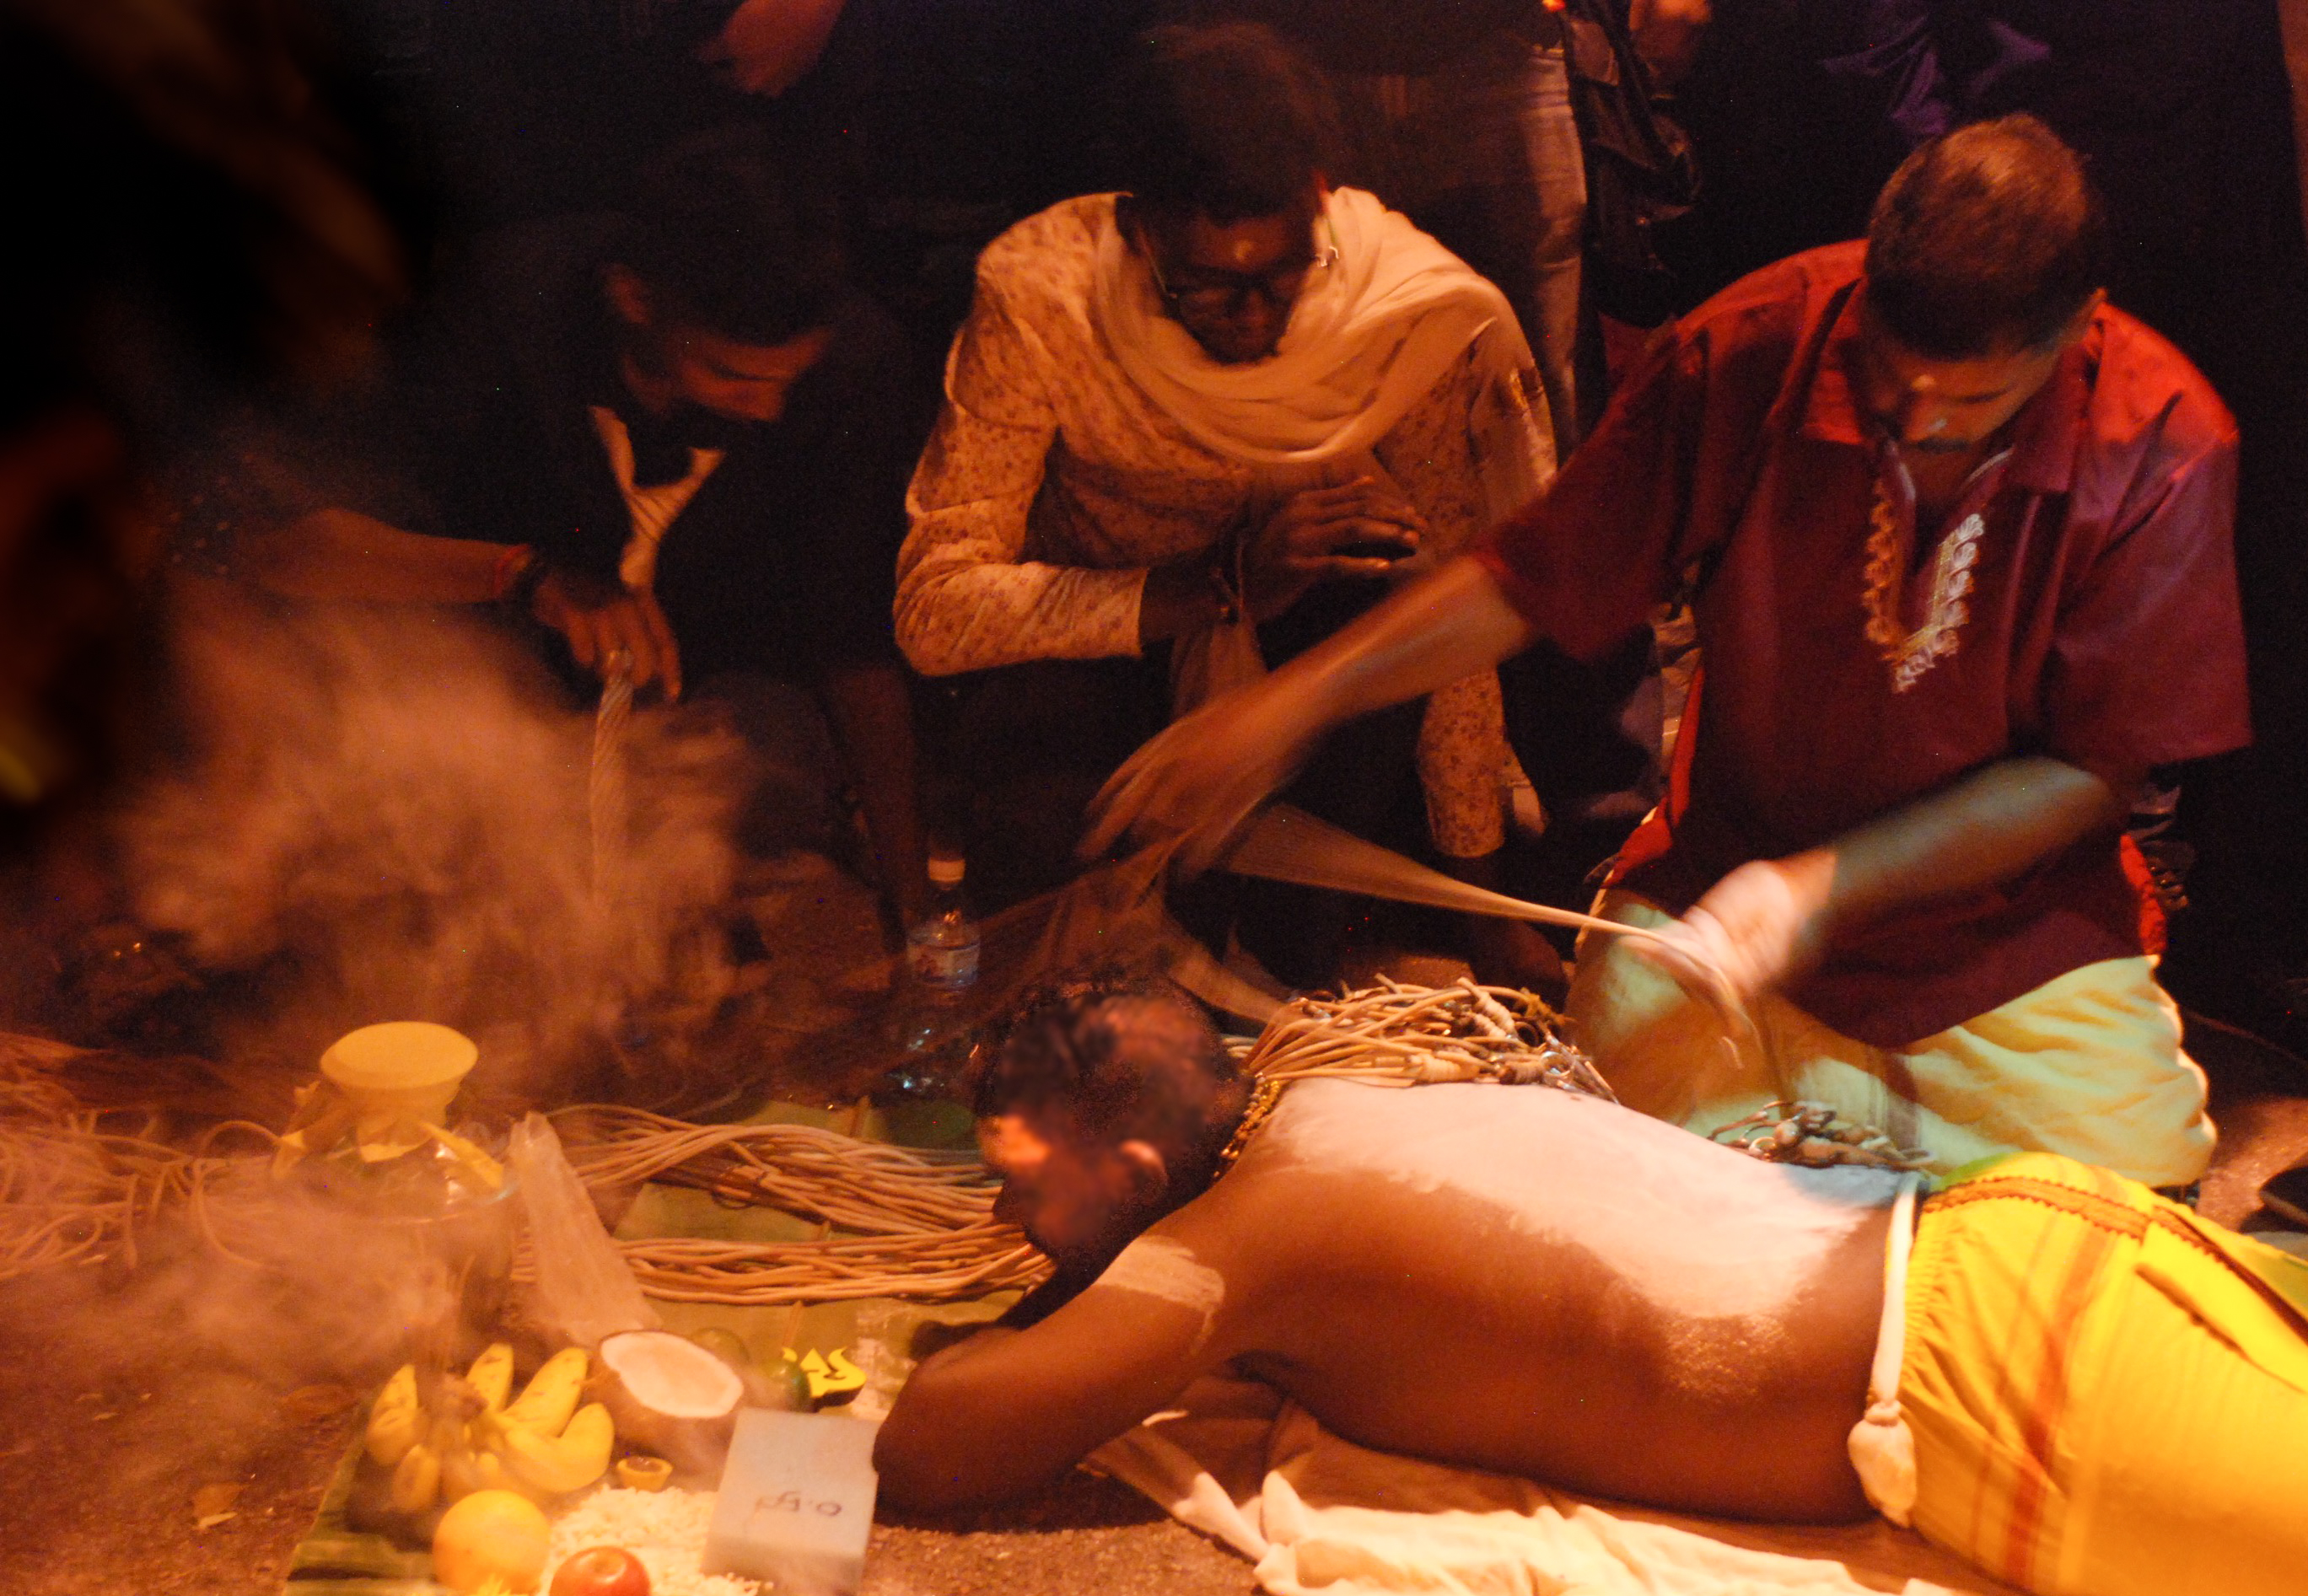 Participant lying down - Thaipusam in Penang